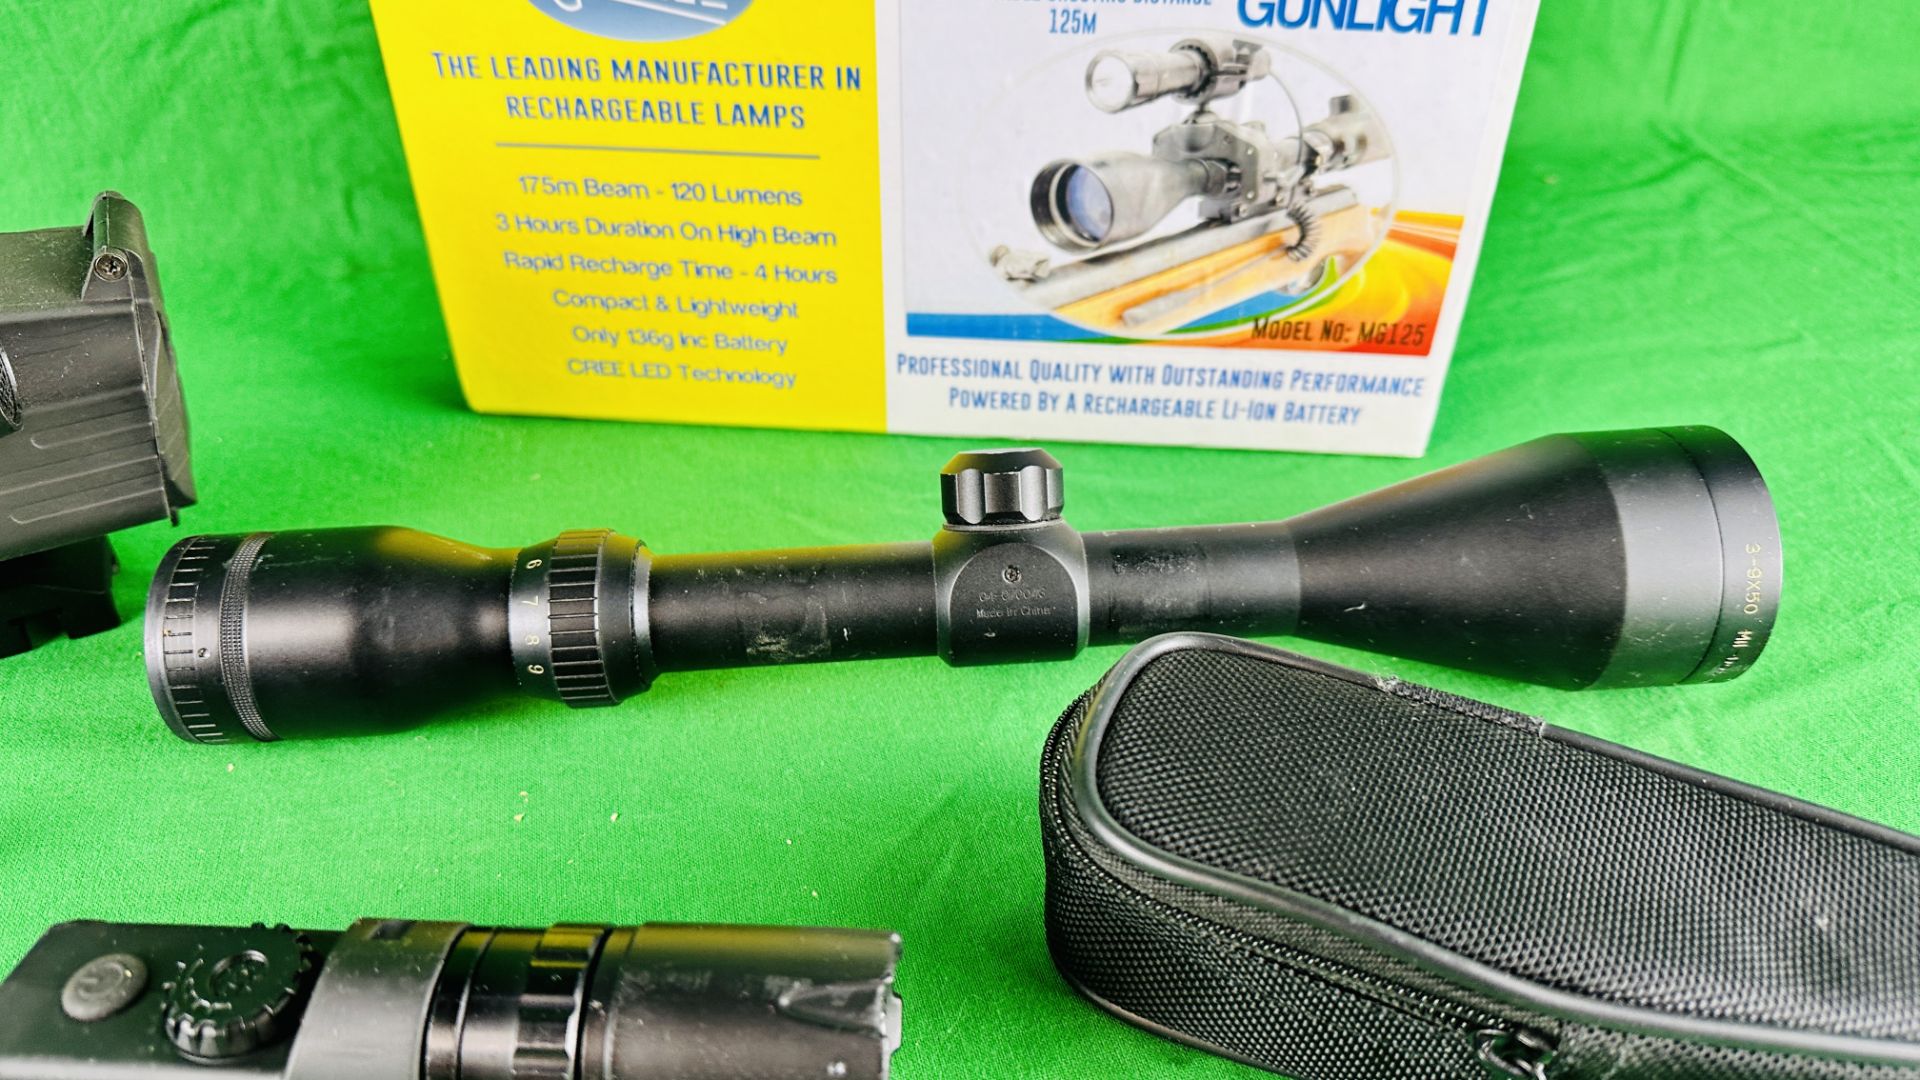 PULSAR DIGISIGHT RIFLE SCOPE, N550, BATTERY, CHARGER, PULSAR IR FLASHLIGHT L-808 - UNTESTED, - Image 7 of 10